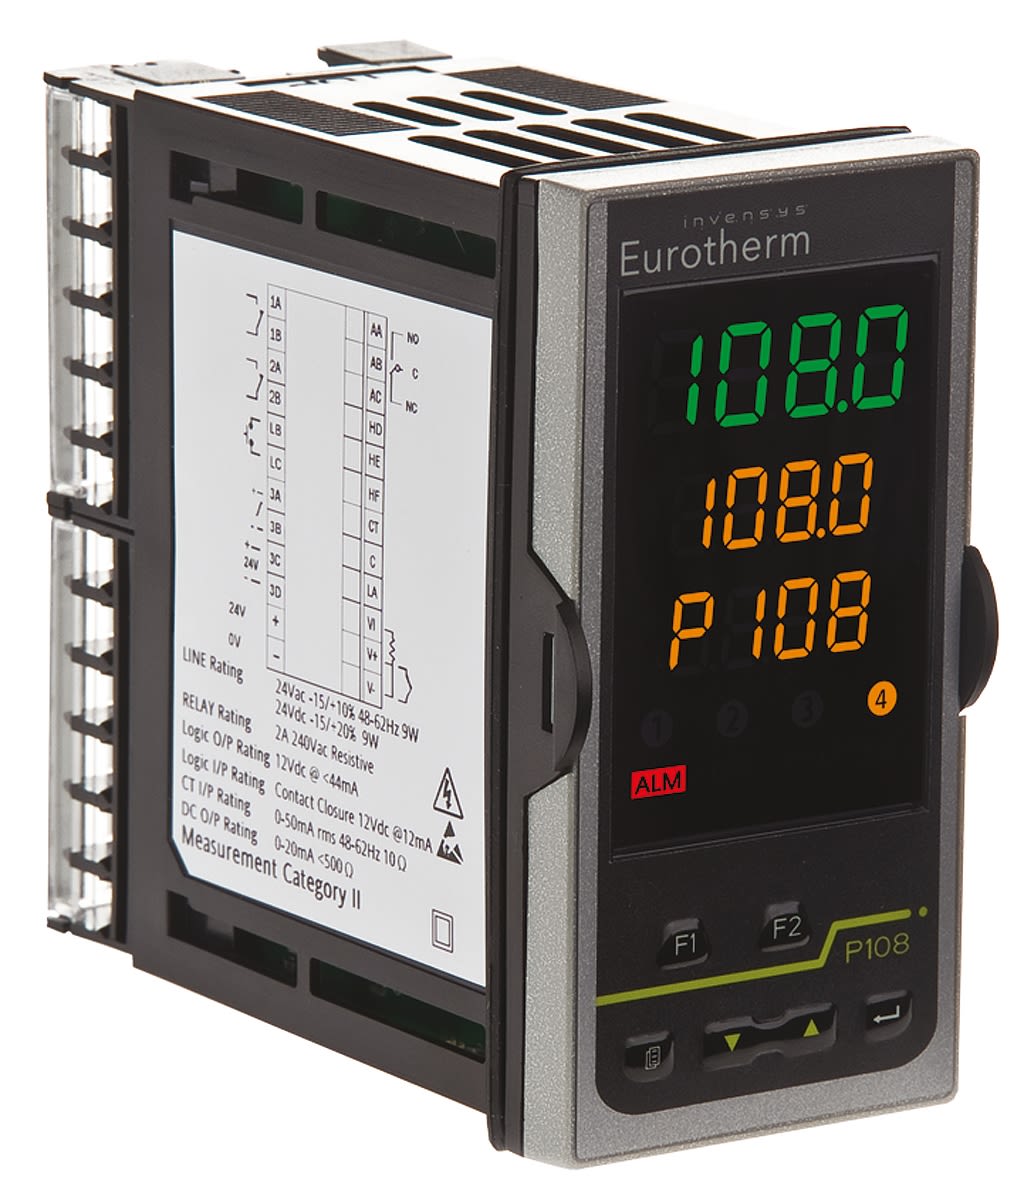 Eurotherm Piccolo P108 PID Temperature Controller, 48 x 96mm, 2 Output Logic, Relay, 24 V ac/dc Supply Voltage